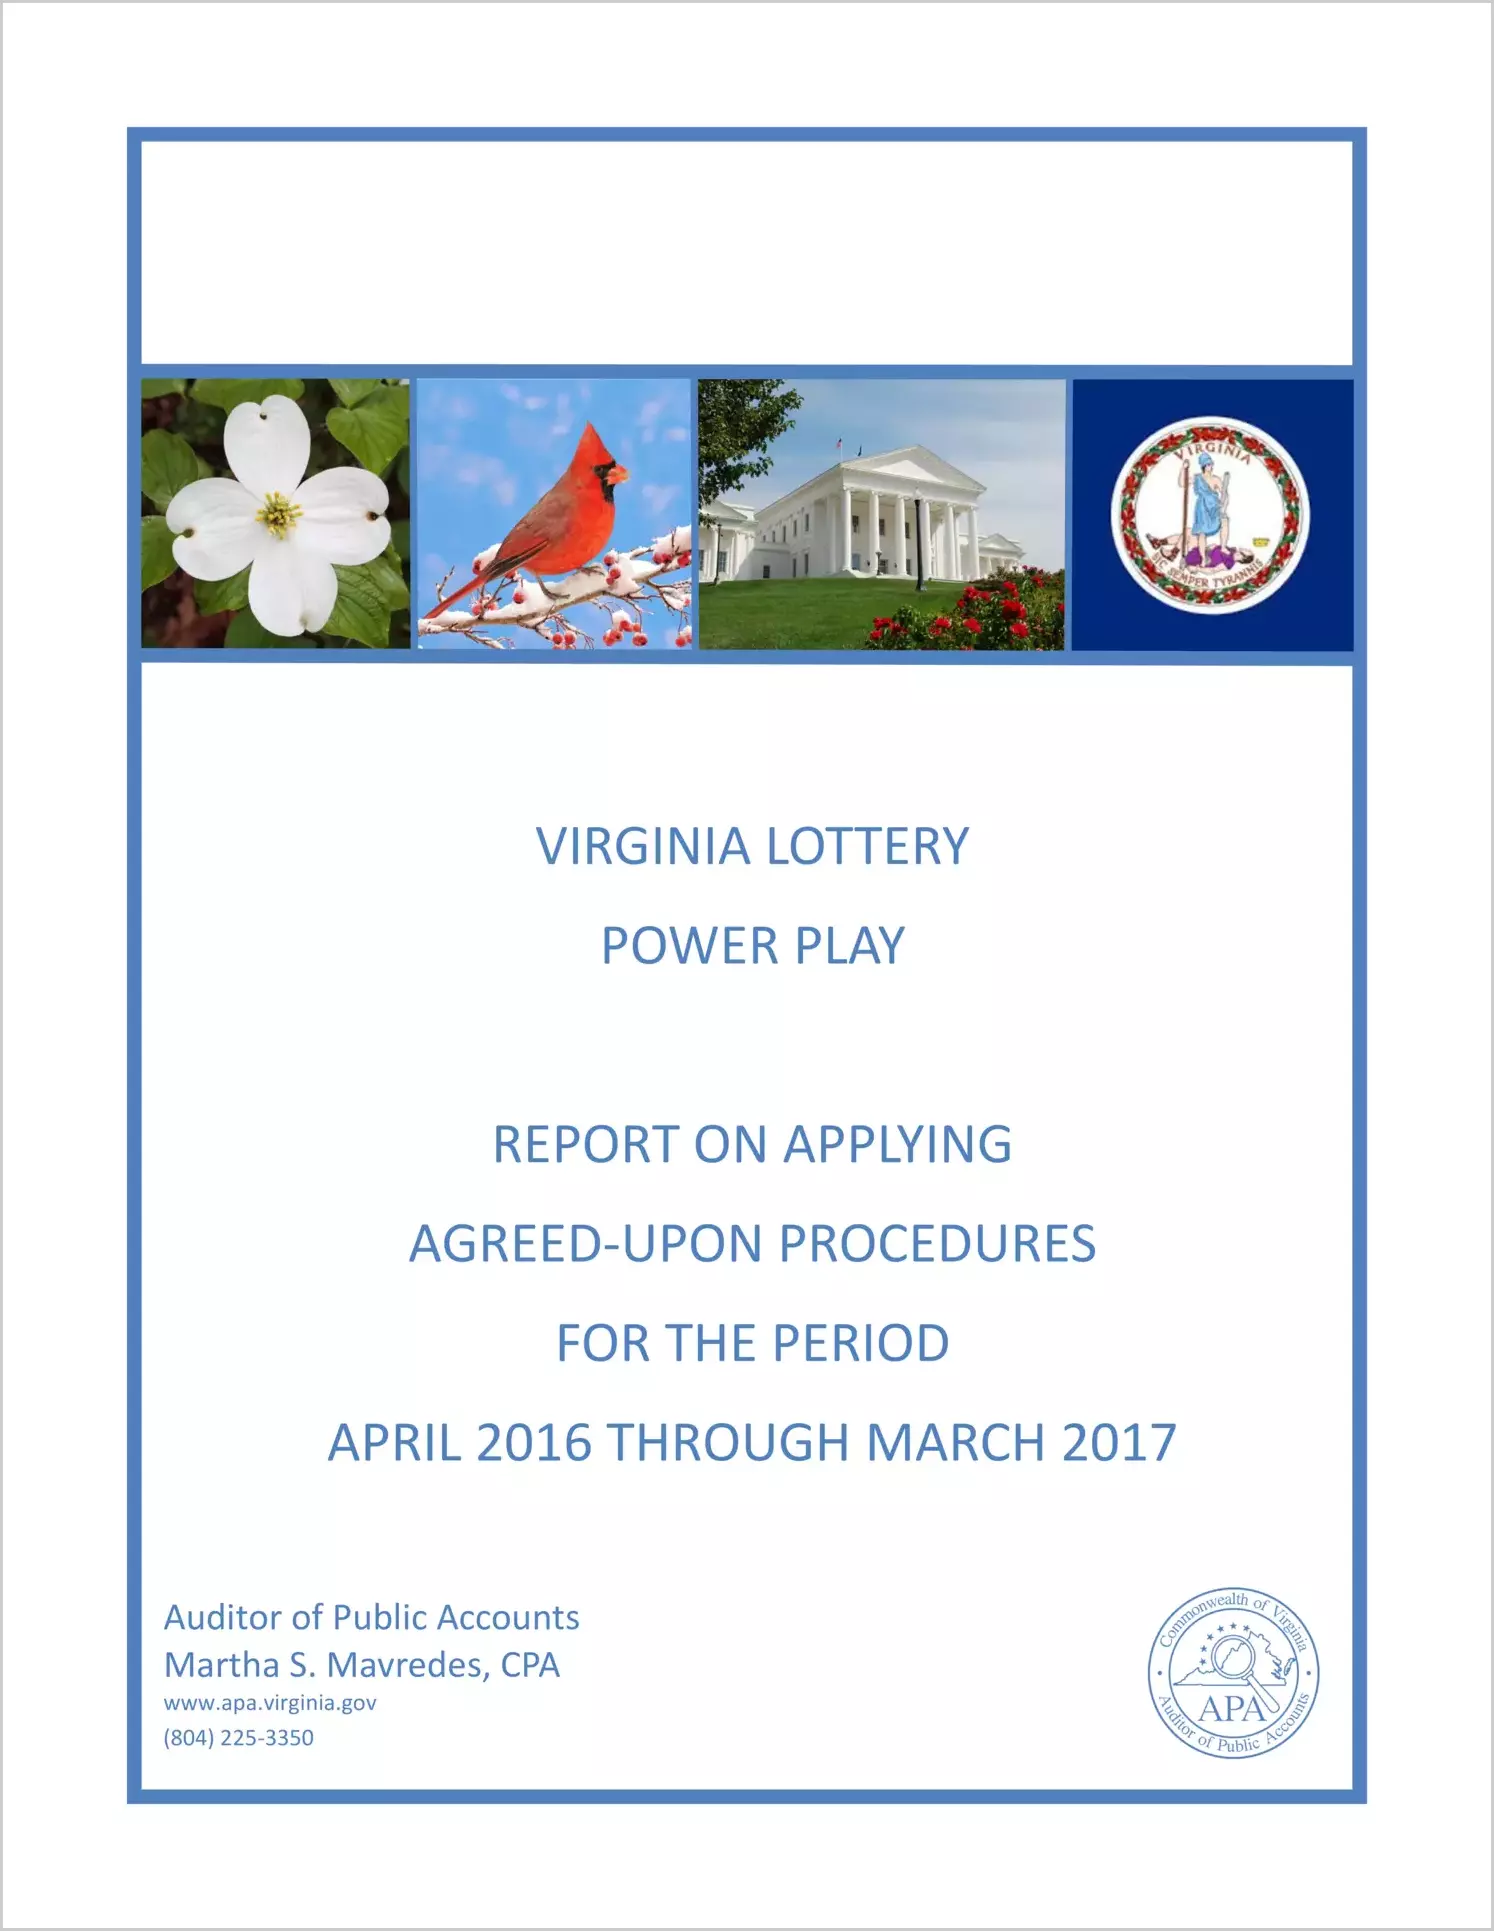 VA Lottery Power Play report on Applying Agreed-Upon Procedures for the period April 2016 through March 2017